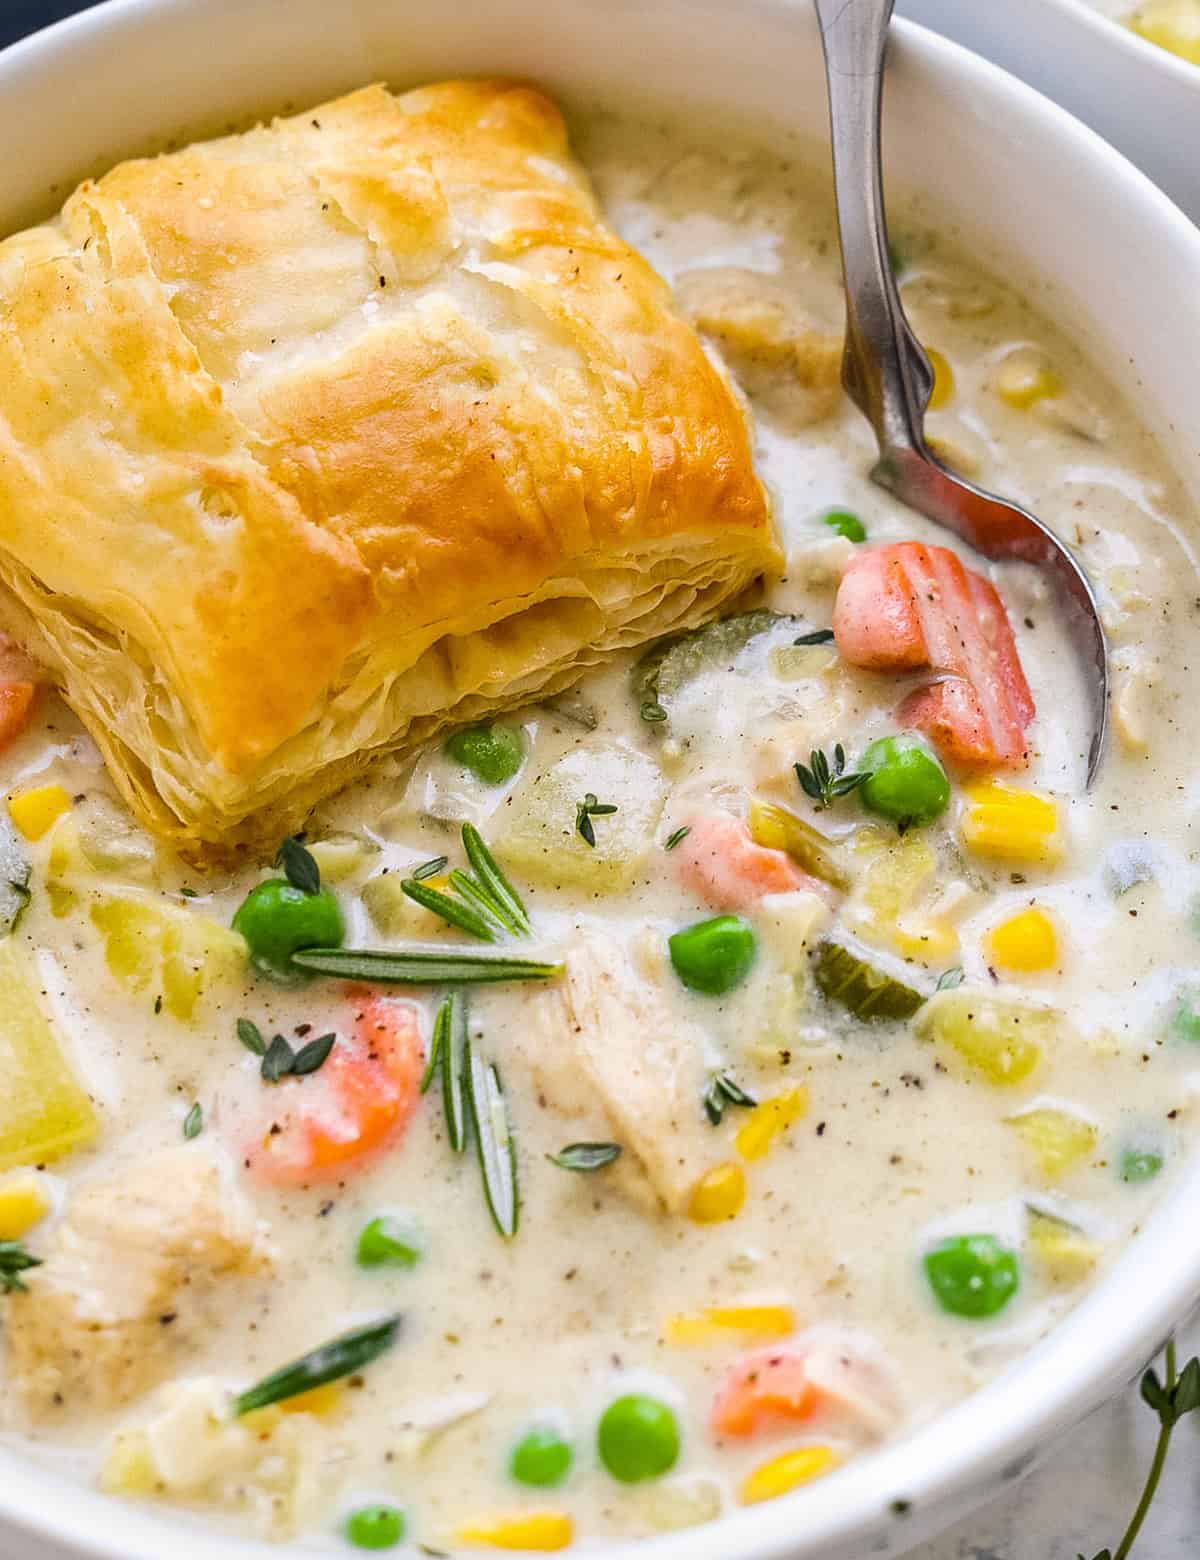 All the amazing savory flavors of a classic chicken pot pie, turned into a deliciously creamy, chowder-like soup! Chicken pot pie soup is a hearty dinner idea the whole family will love. #soup #chickenpotpie #chickensoup